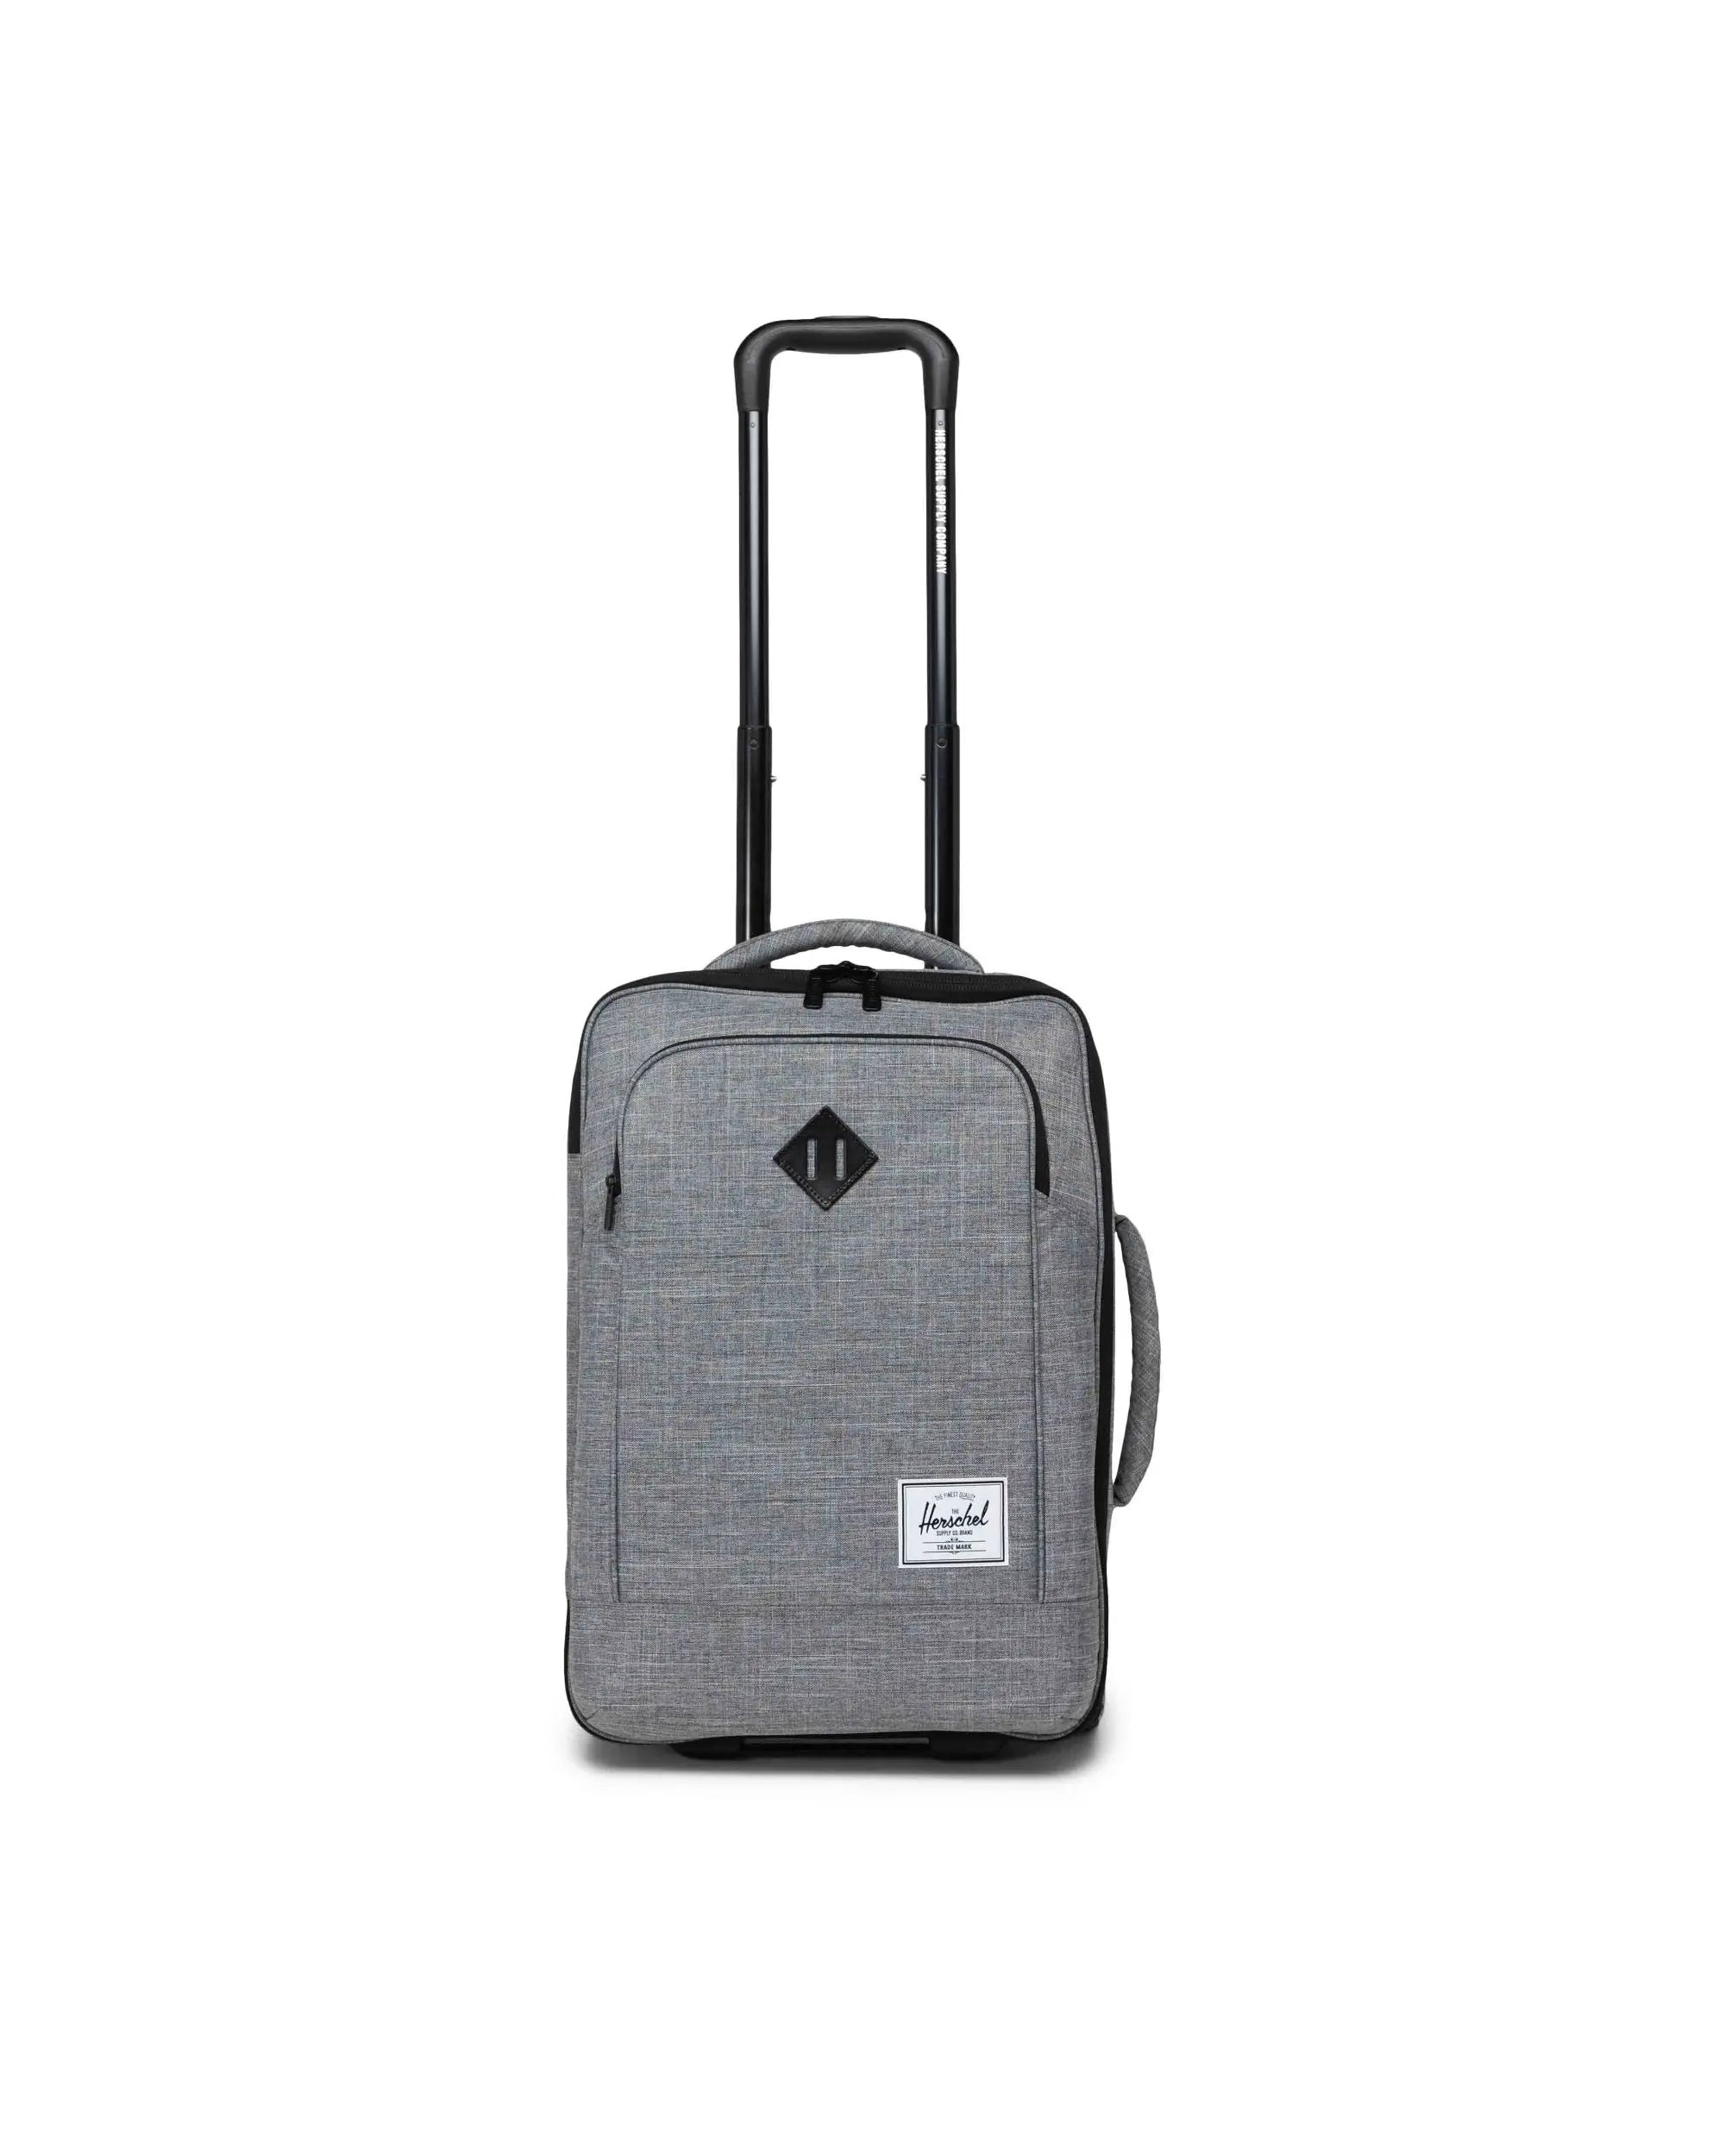 Herschel Heritage Softshell Large Carry On Luggage - 00919